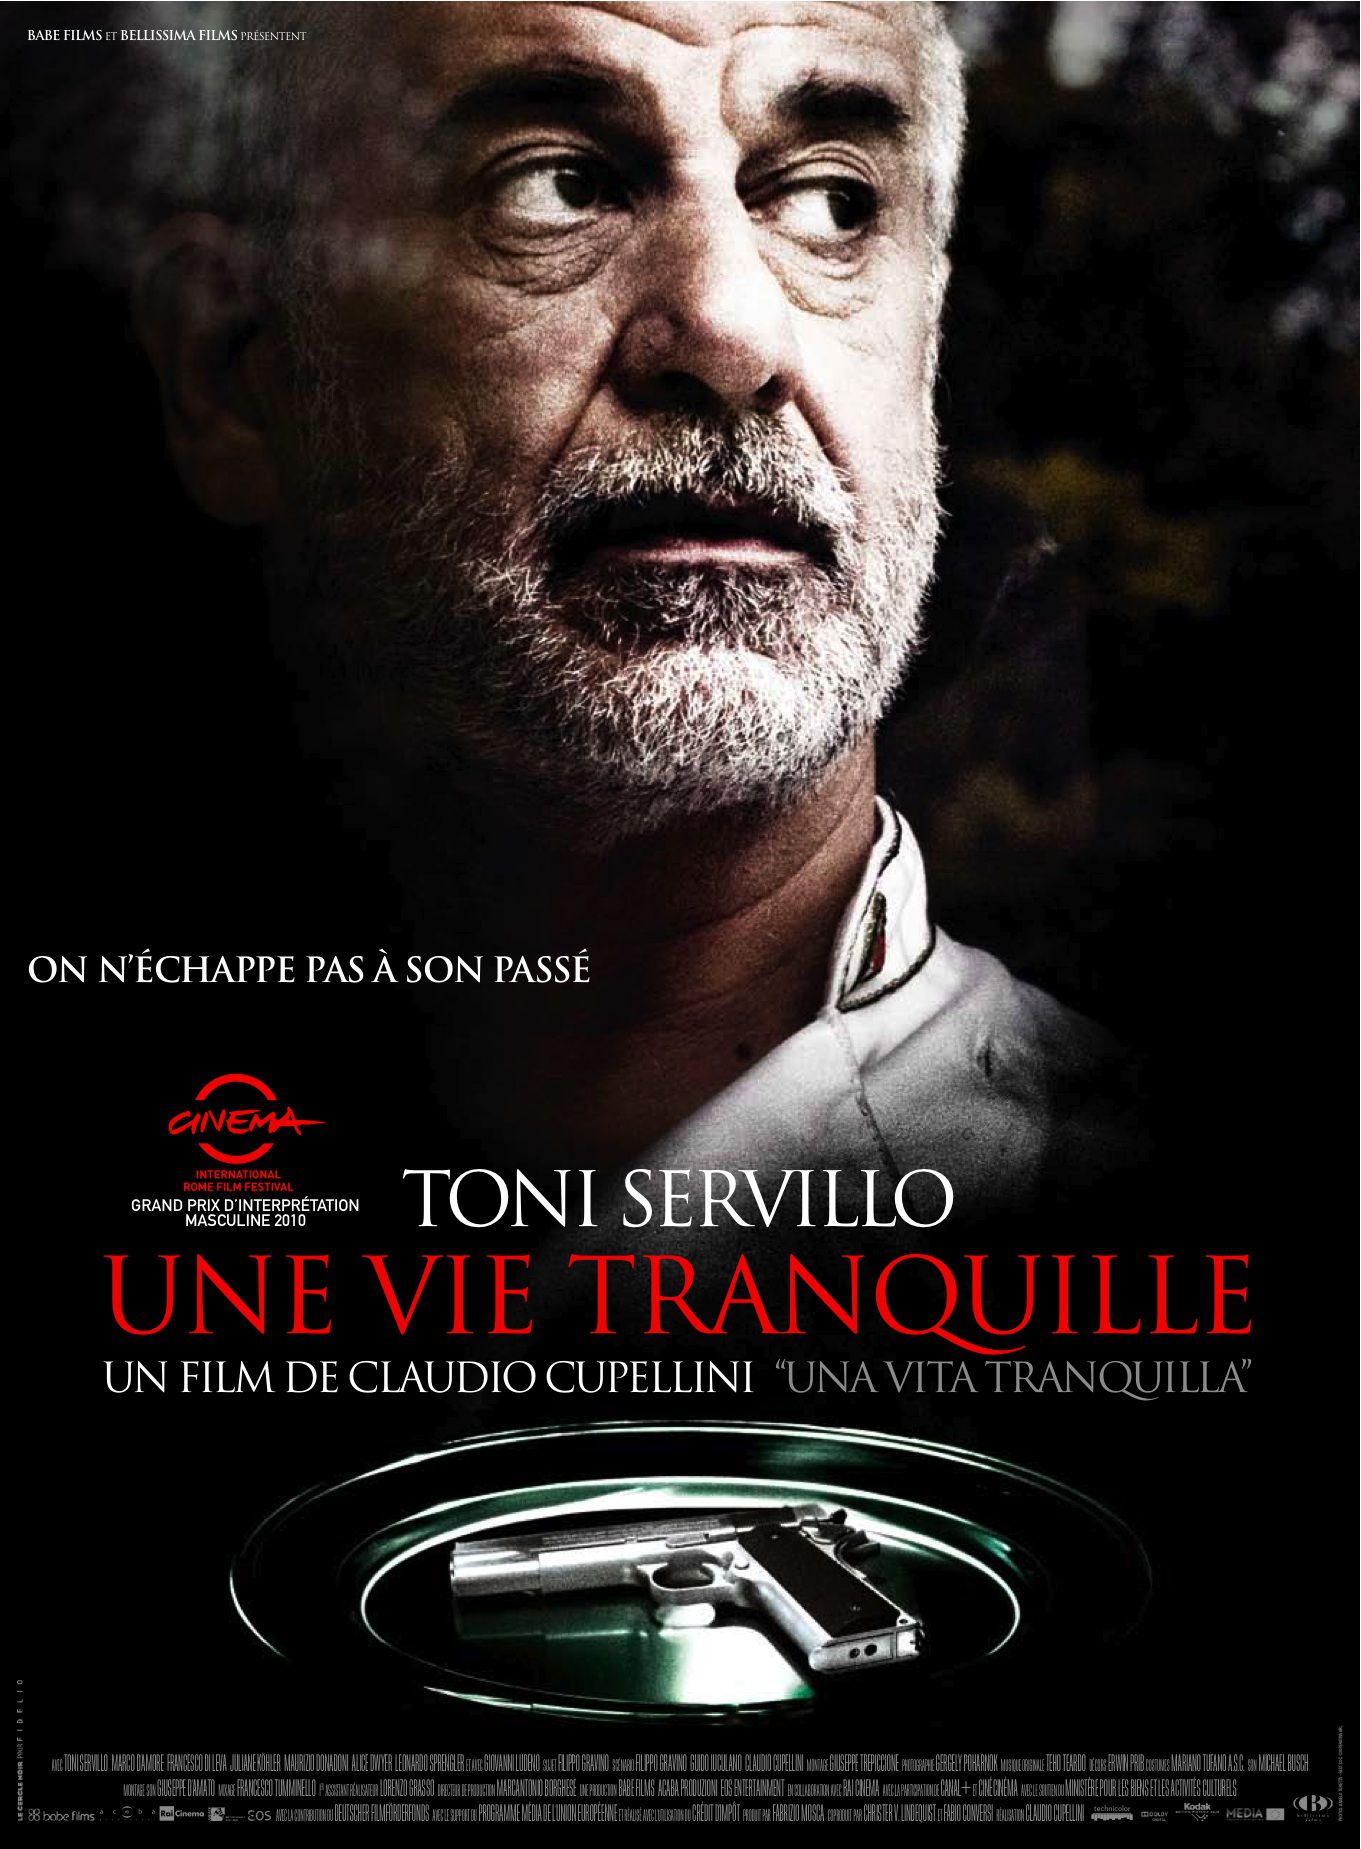 Une vie tranquille - Film (2011) streaming VF gratuit complet